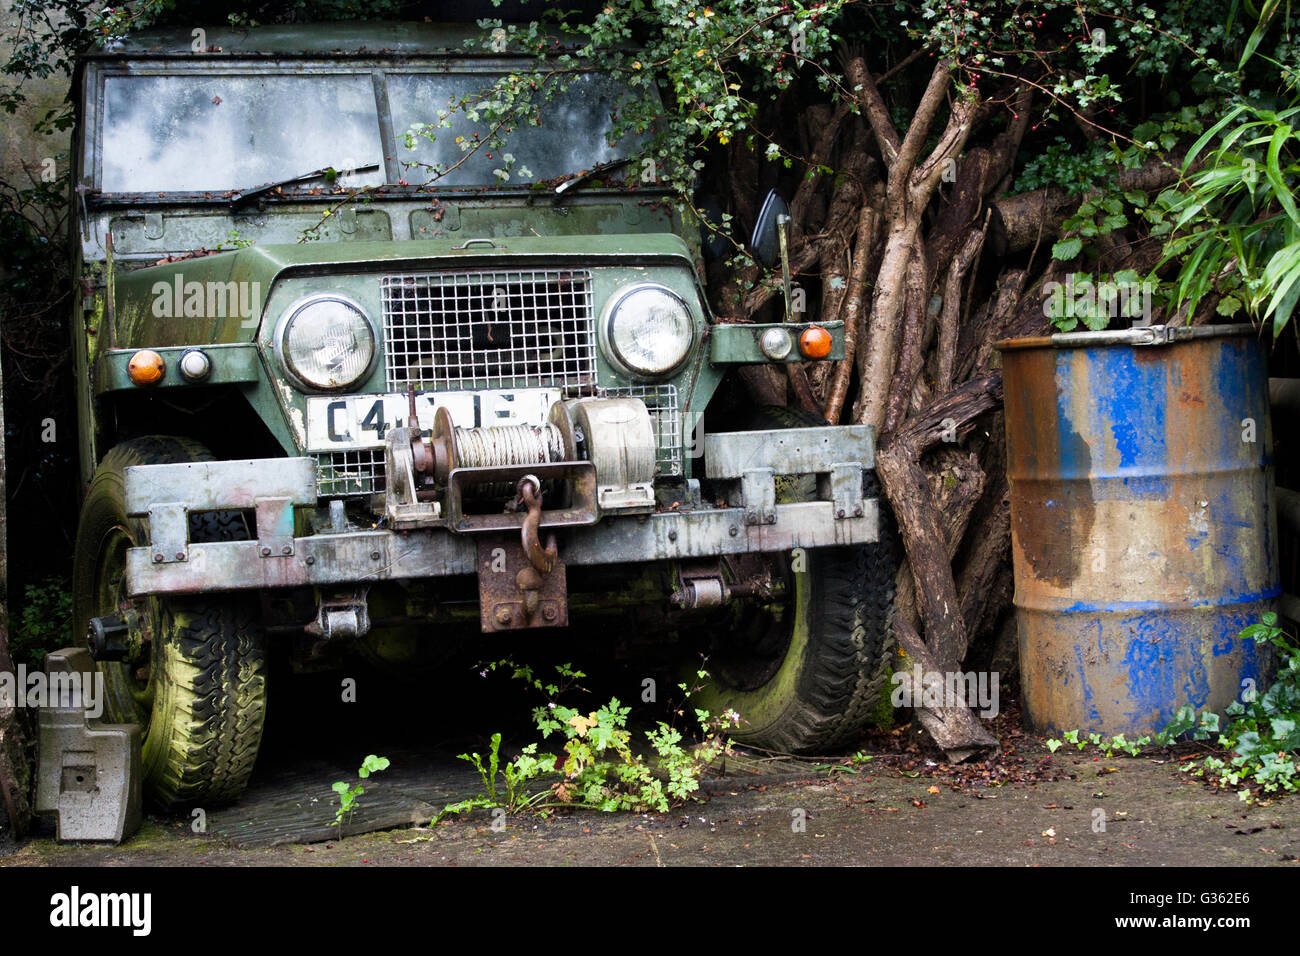 An old abadoned green Land Rover Stock Photo